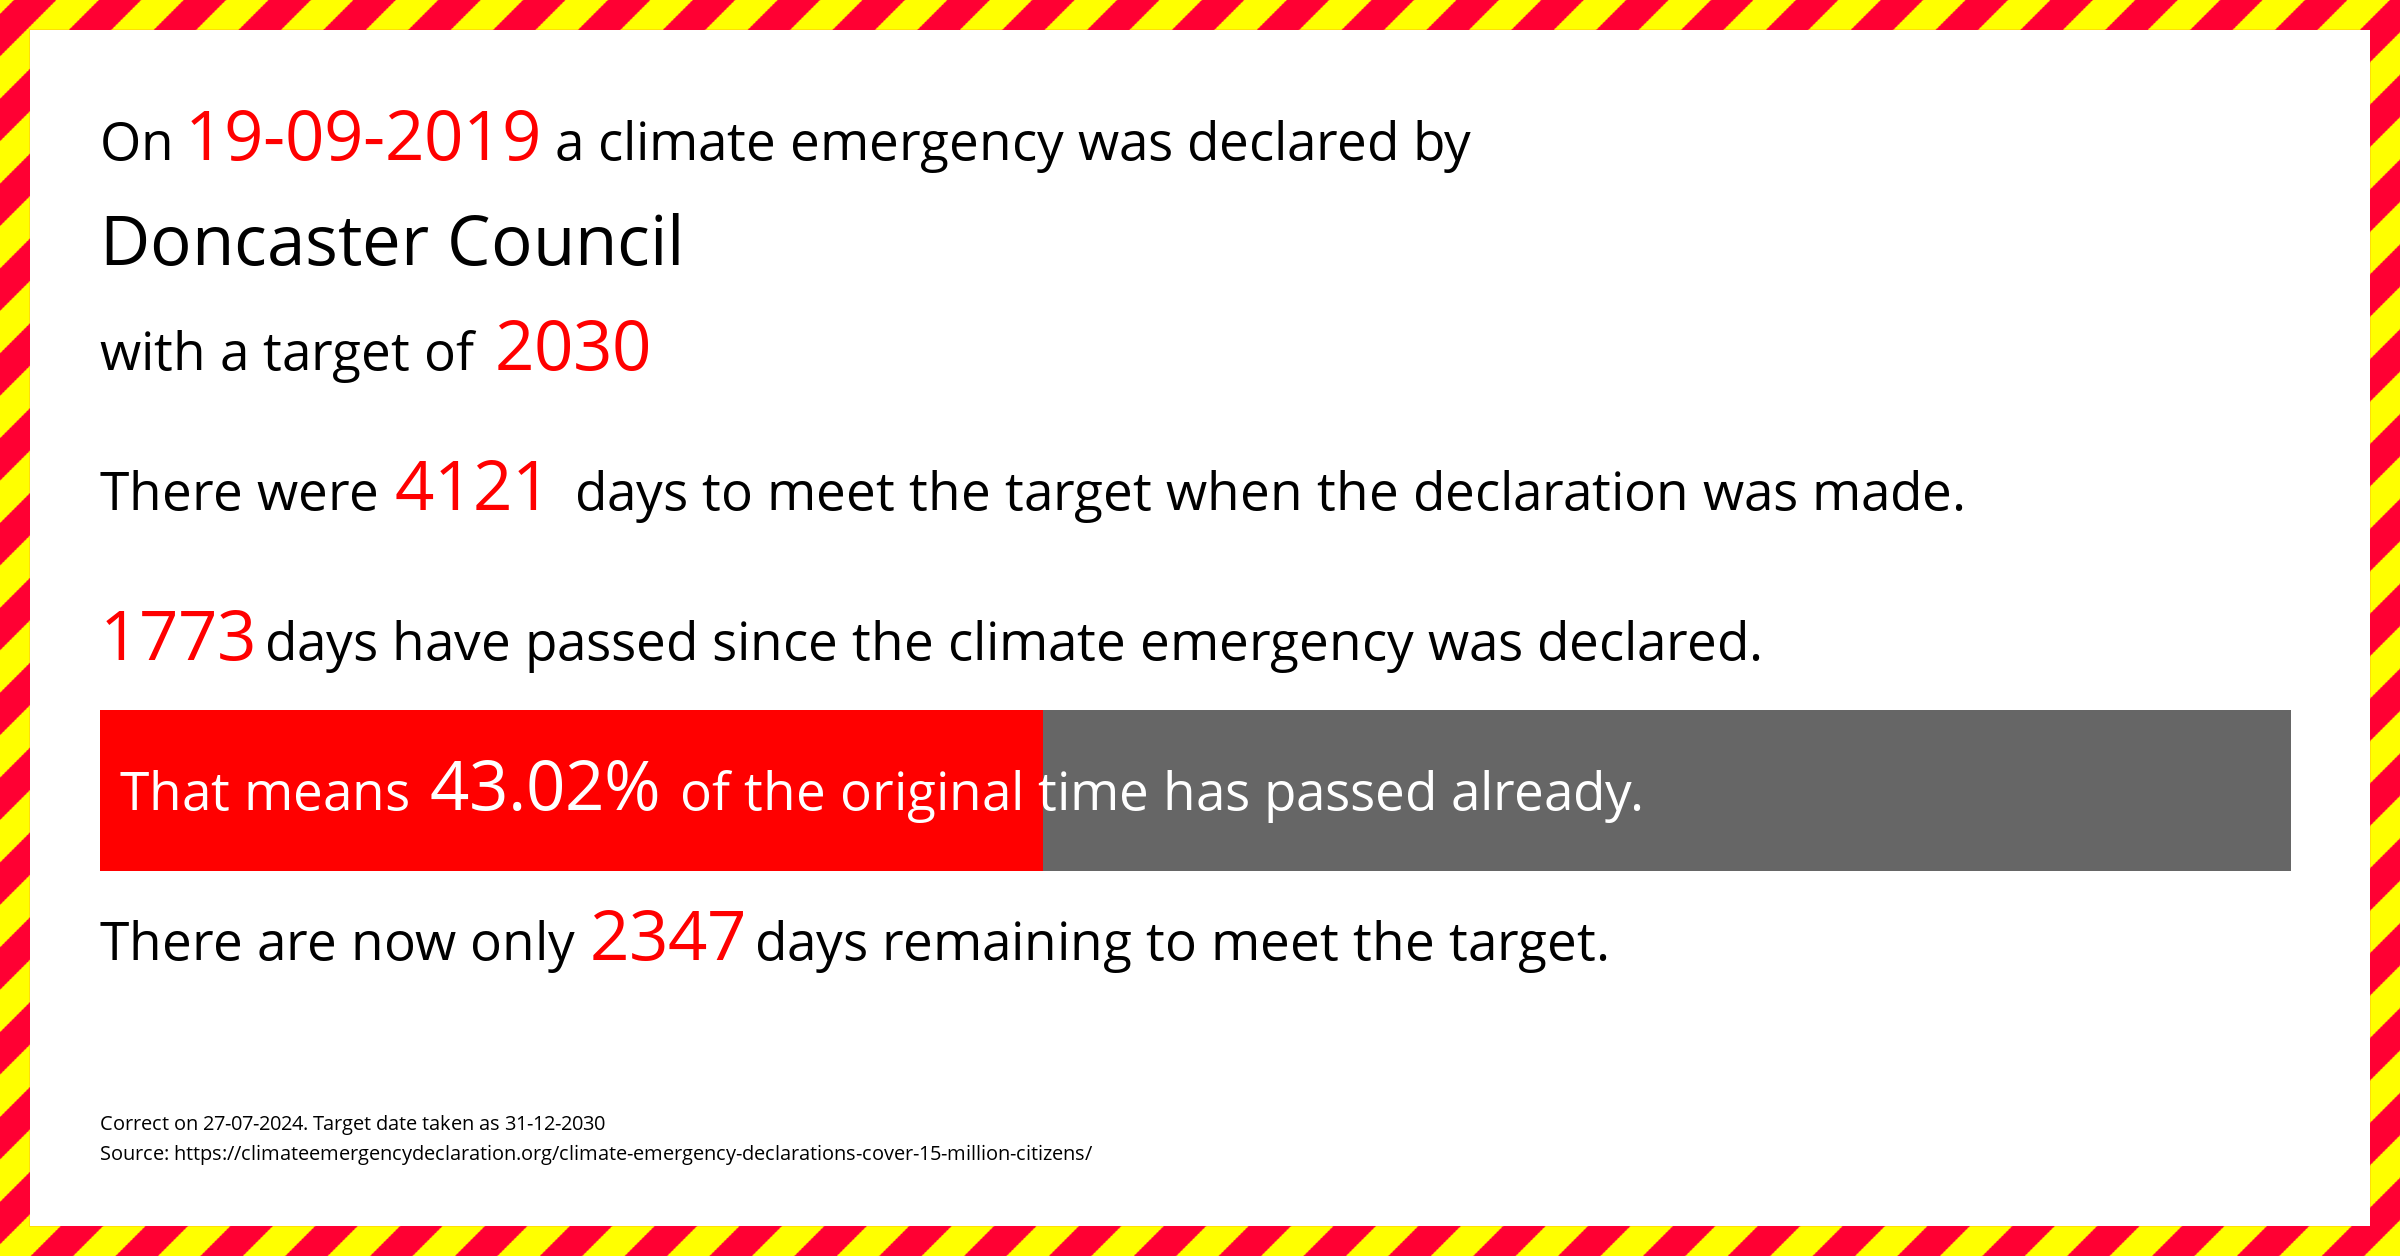 Doncaster Council declared a Climate emergency on Thursday 19th September 2019, with a target of 2030.